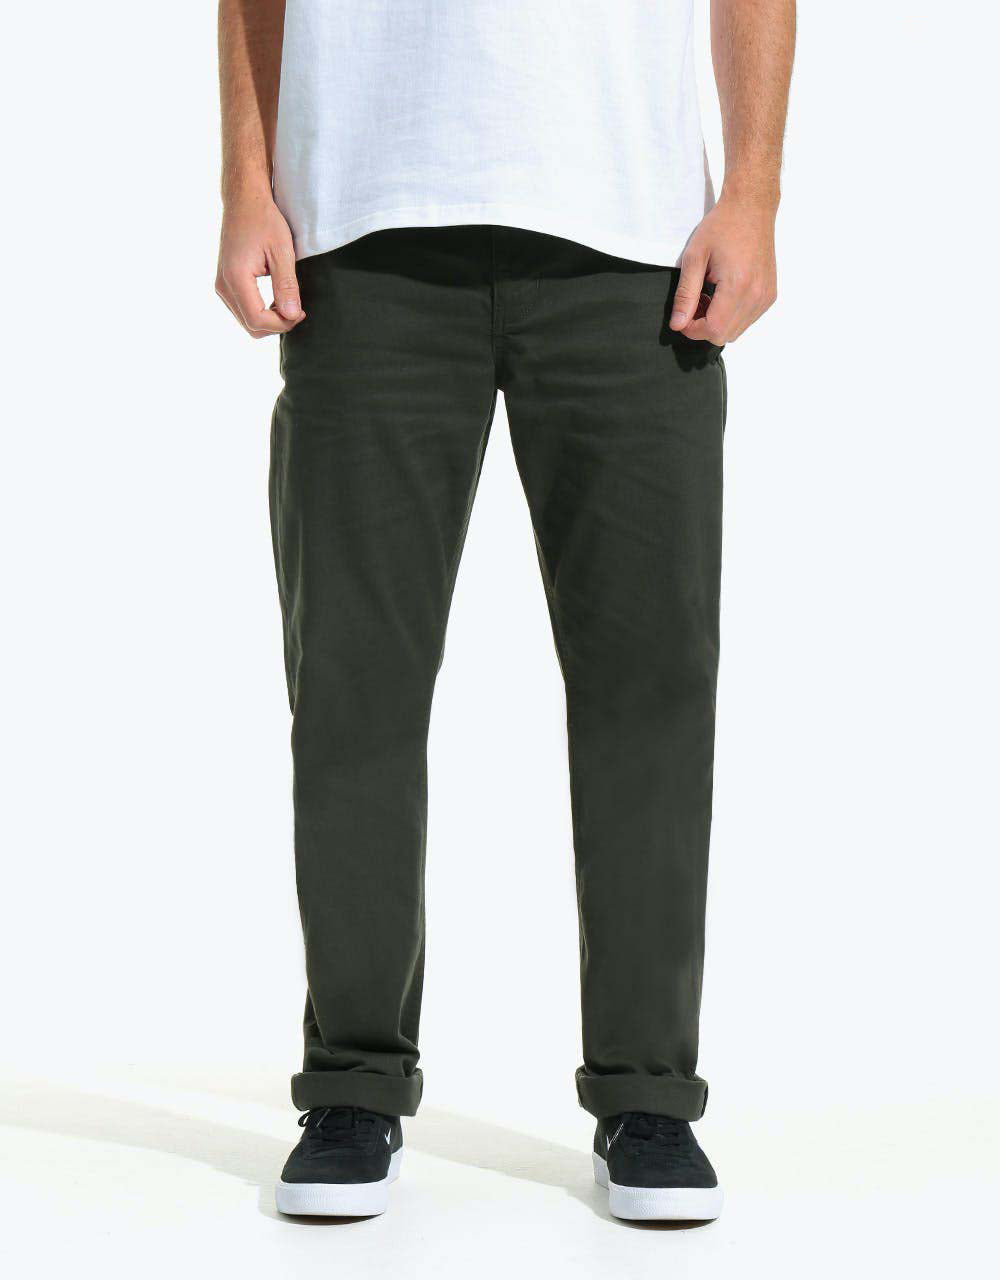 Route One Premium Relaxed Fit Chinos - Army